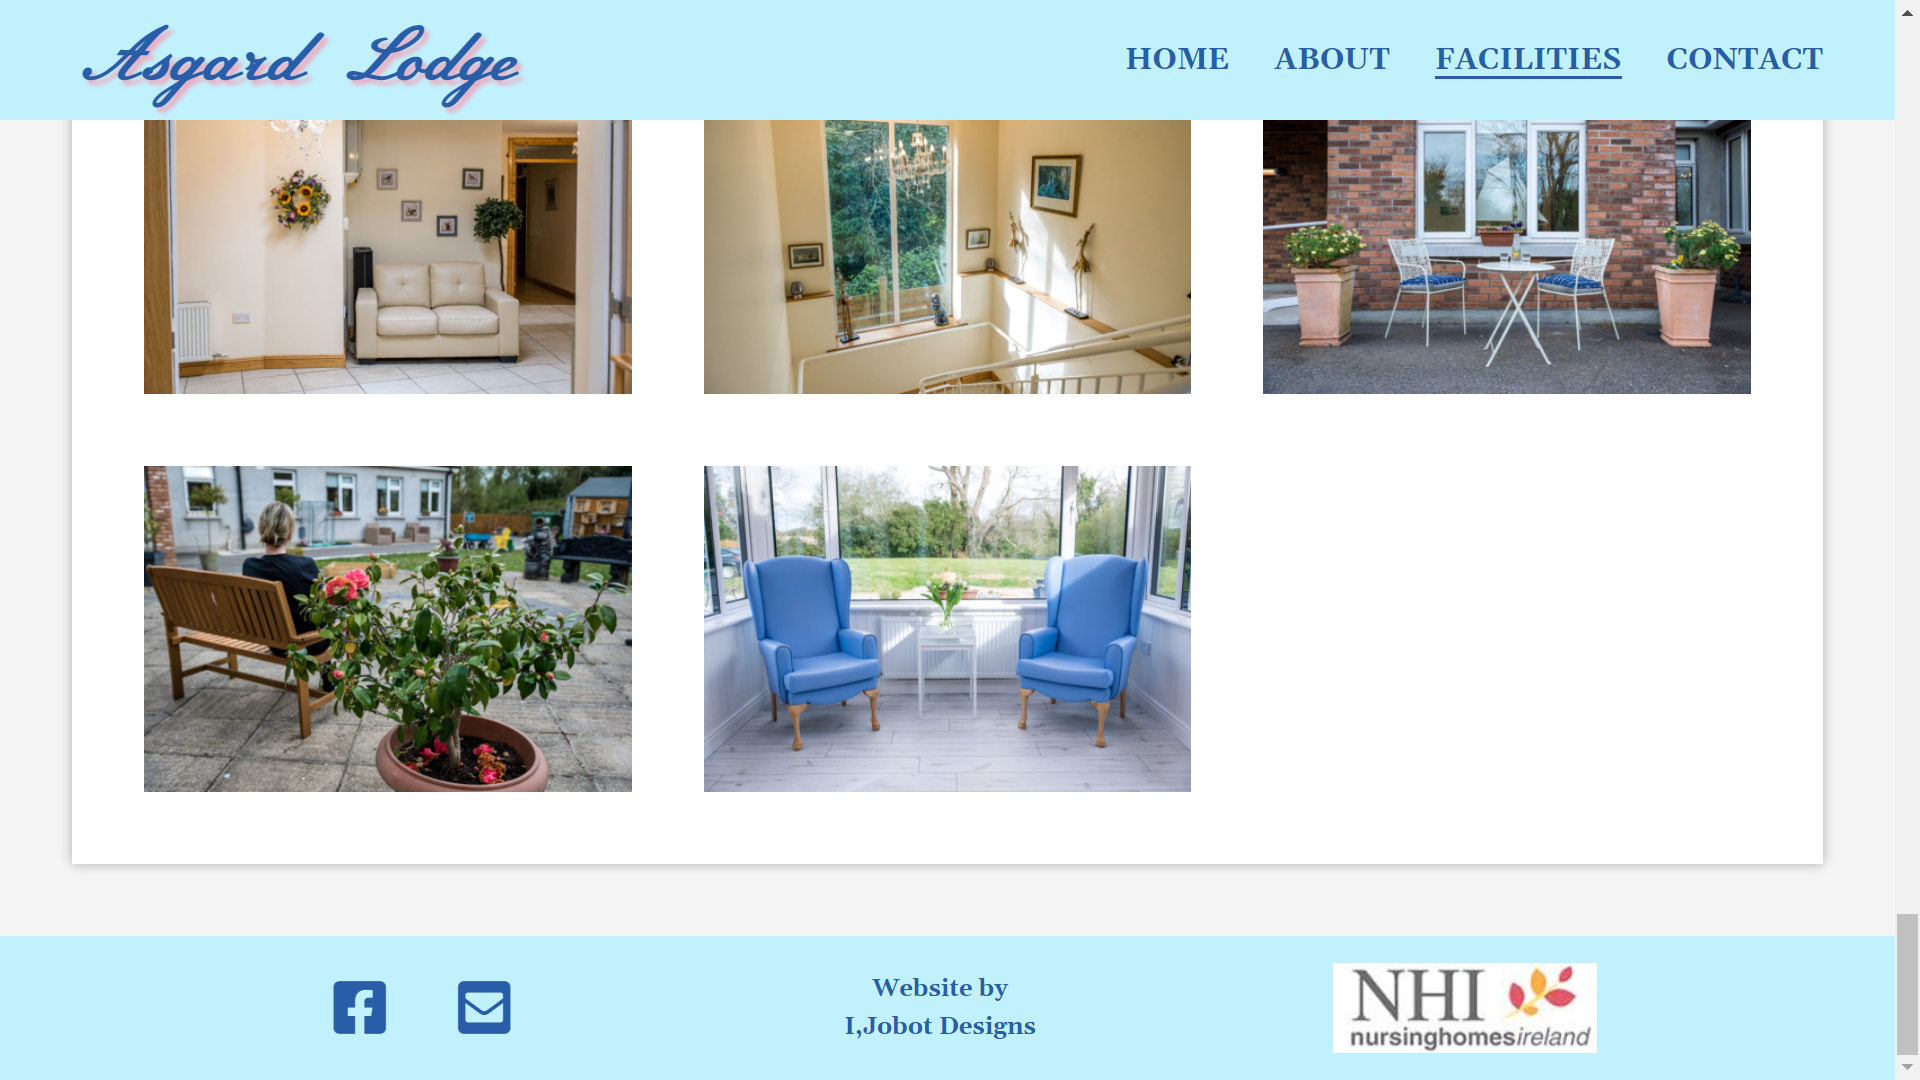 The facilities page for the Asgard Lodge website